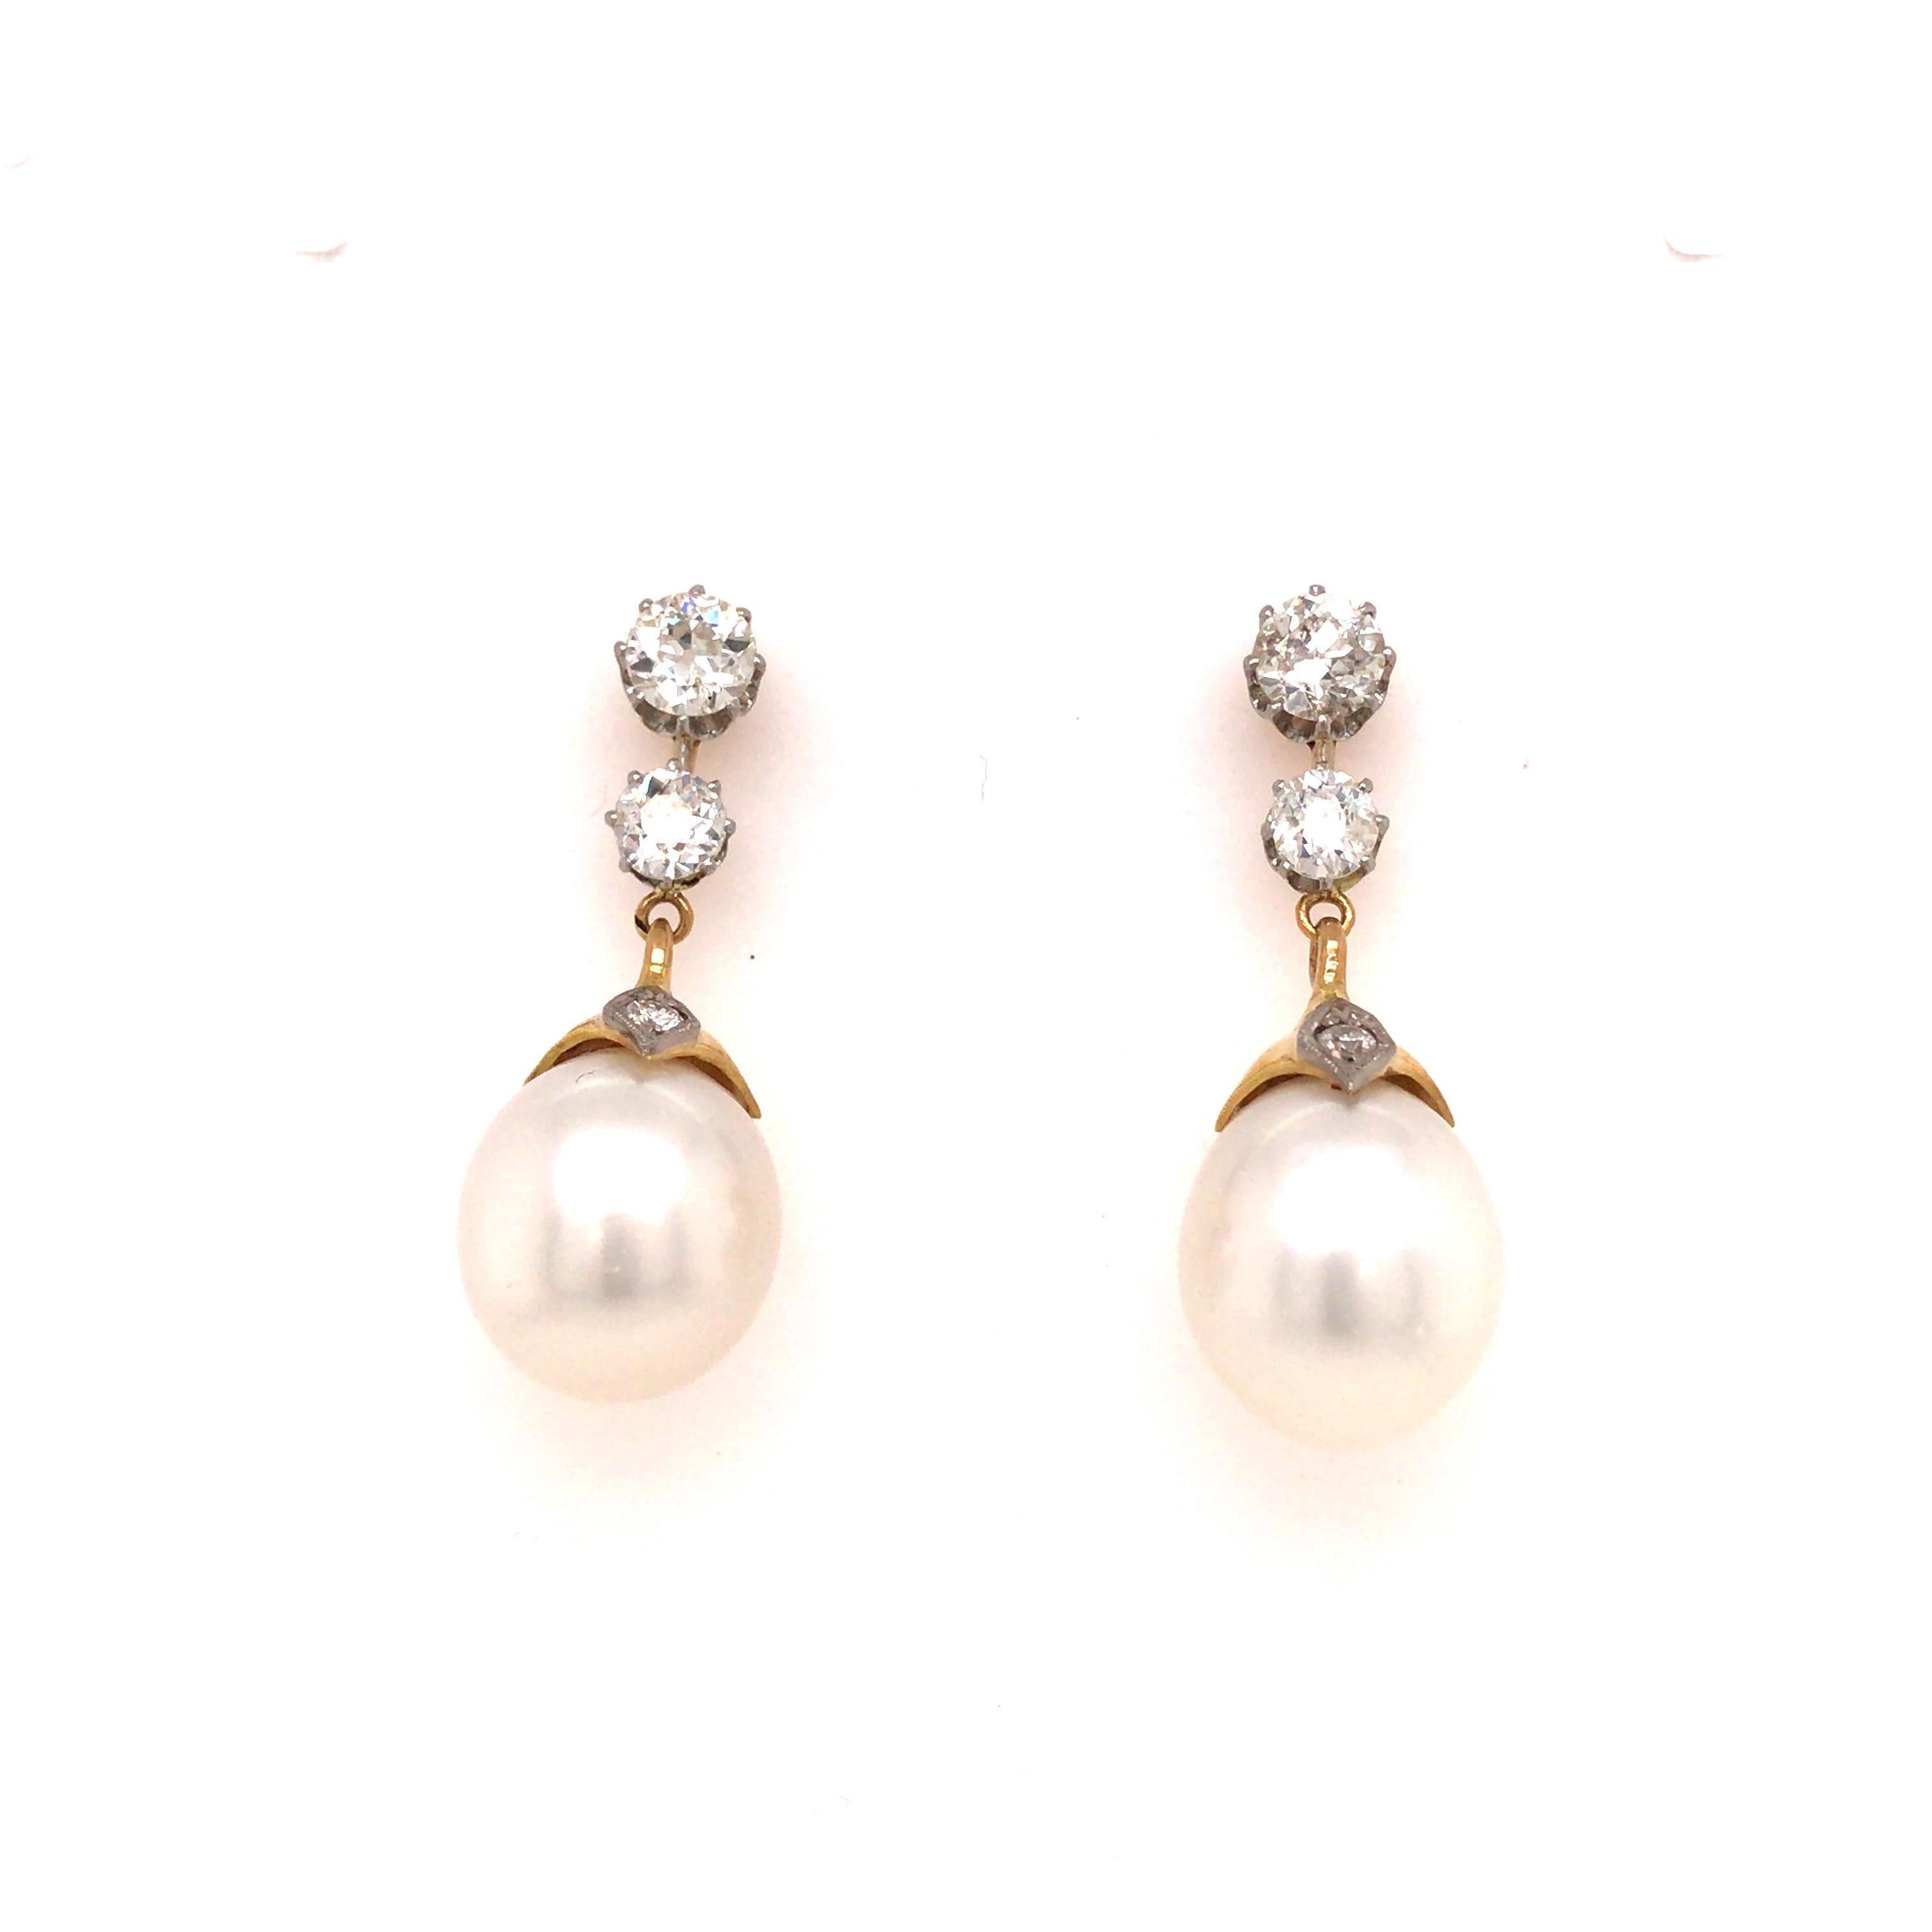 Platinum and 18K Yellow Gold Vintage Diamond and Pearl Drop Earrings .  (6) Round Brilliant Cut Diamonds weighing 1.50 carat total weight, G-H in color, VS in clarity and (2) 12-13mm White Pearls are expertly set.  The Earrings measure 1 1/4 inch in